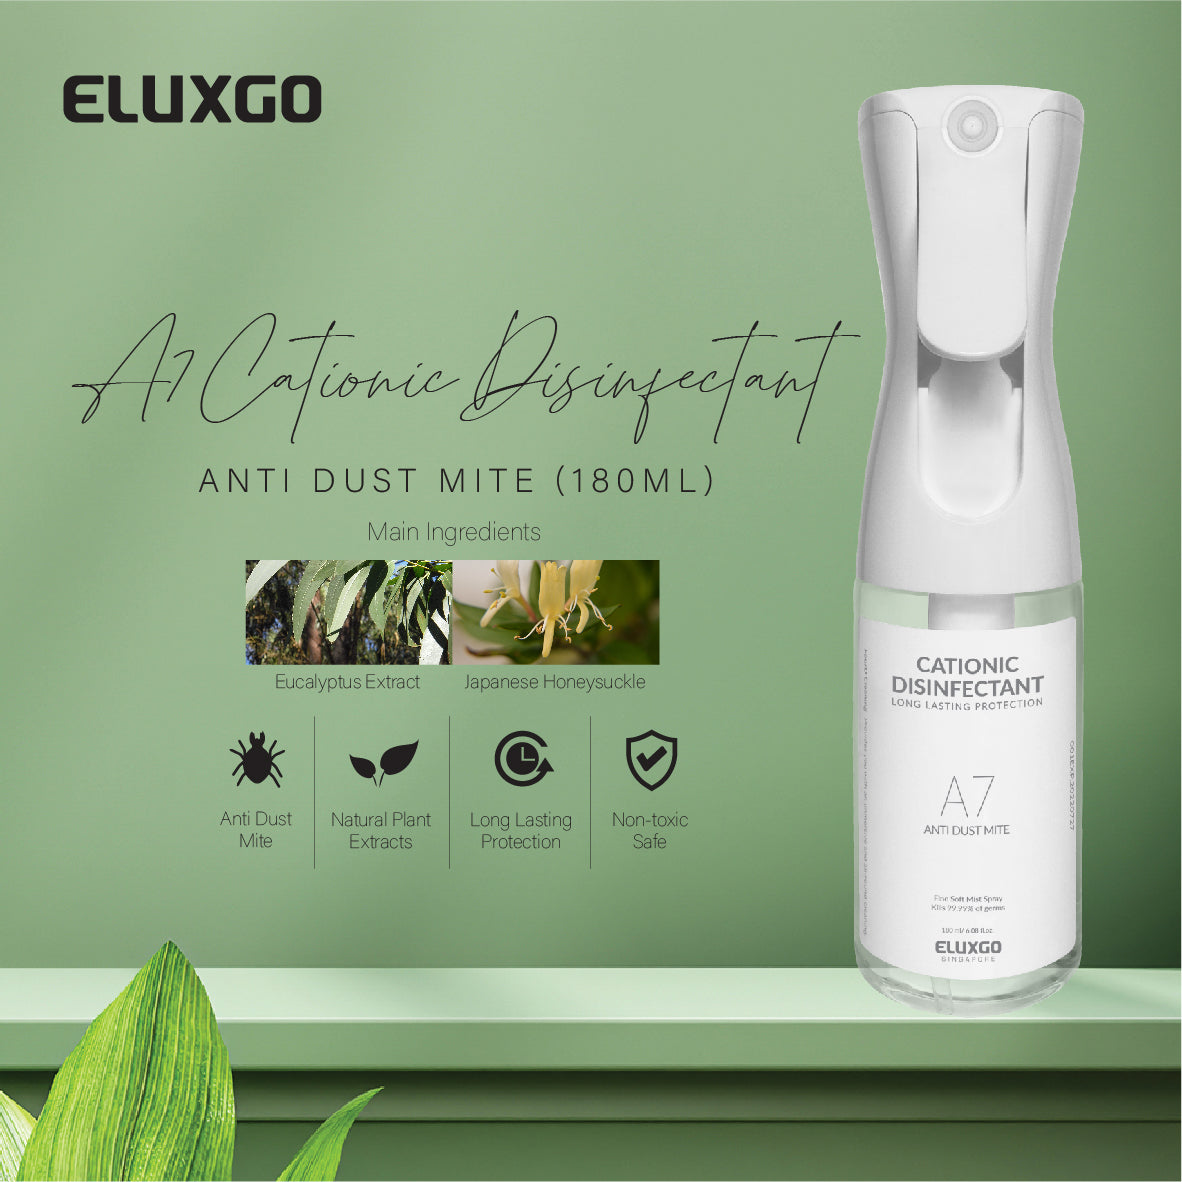 Eluxgo-A7-Cationic-Disinfectant-180ml-Fine soft mist spray-evenly in the air-to get rid of-odor-in the-house-or-room-anti-dust-mite